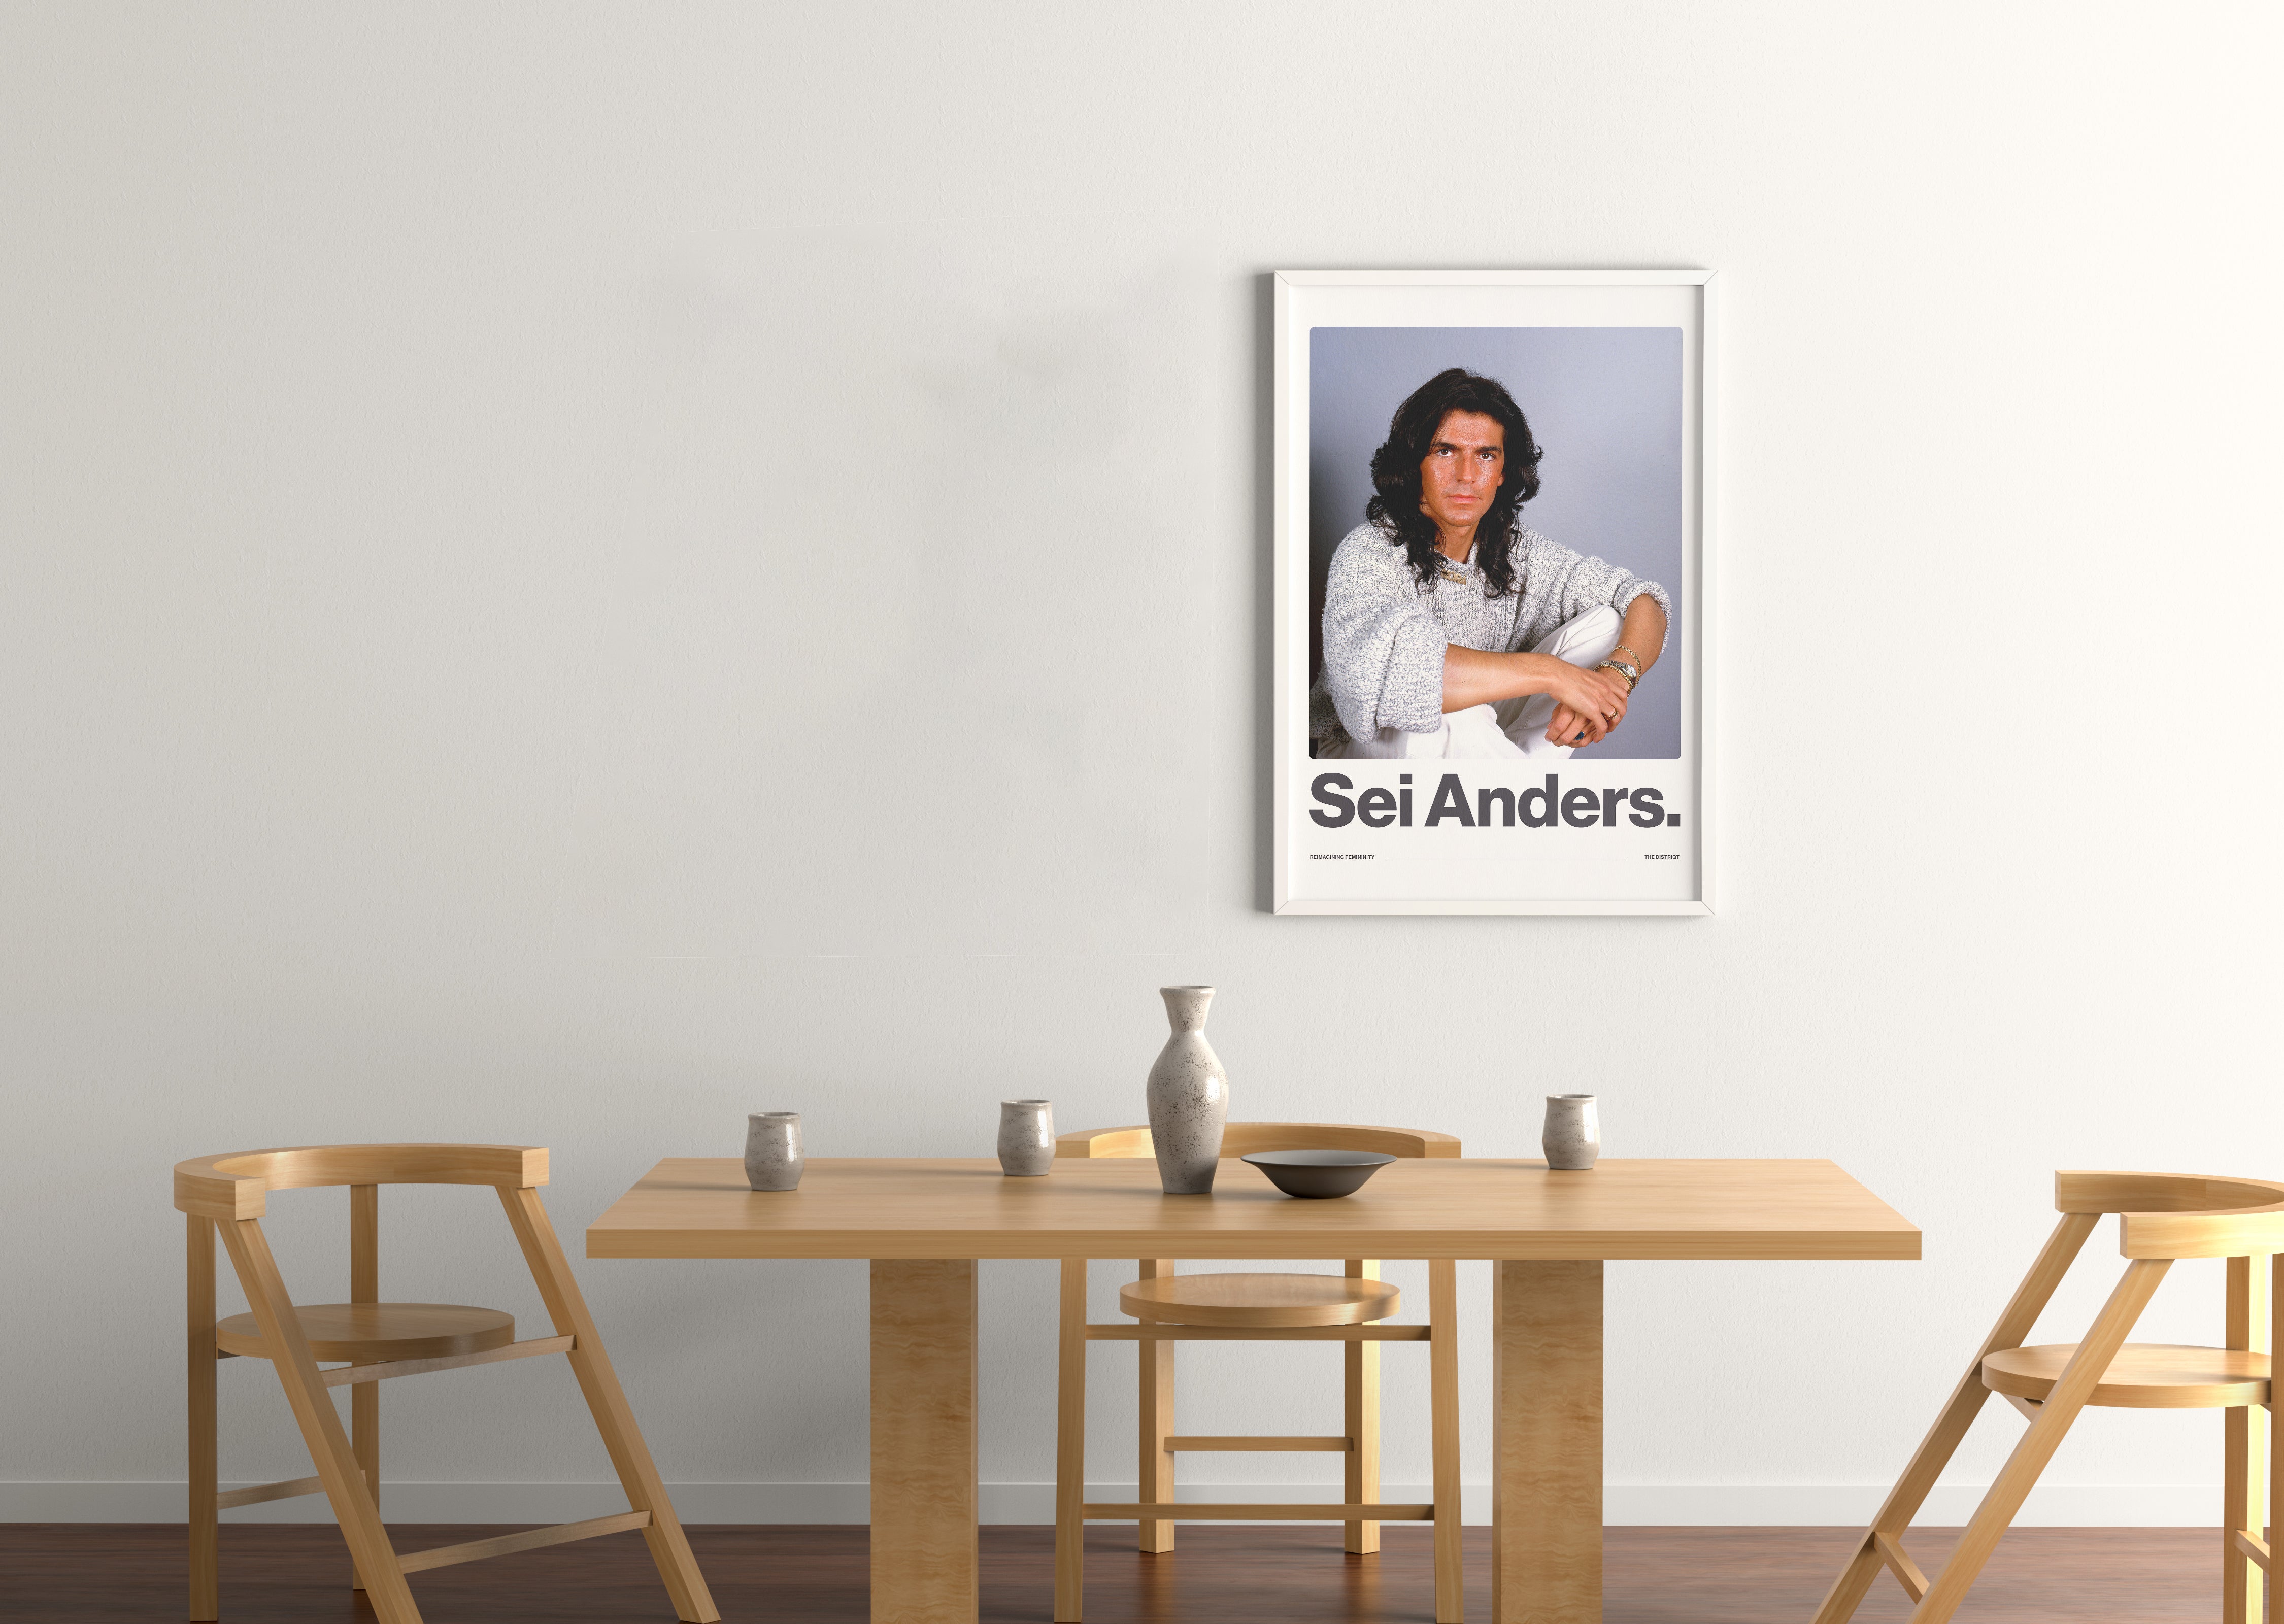 SEI ANDERS POSTER